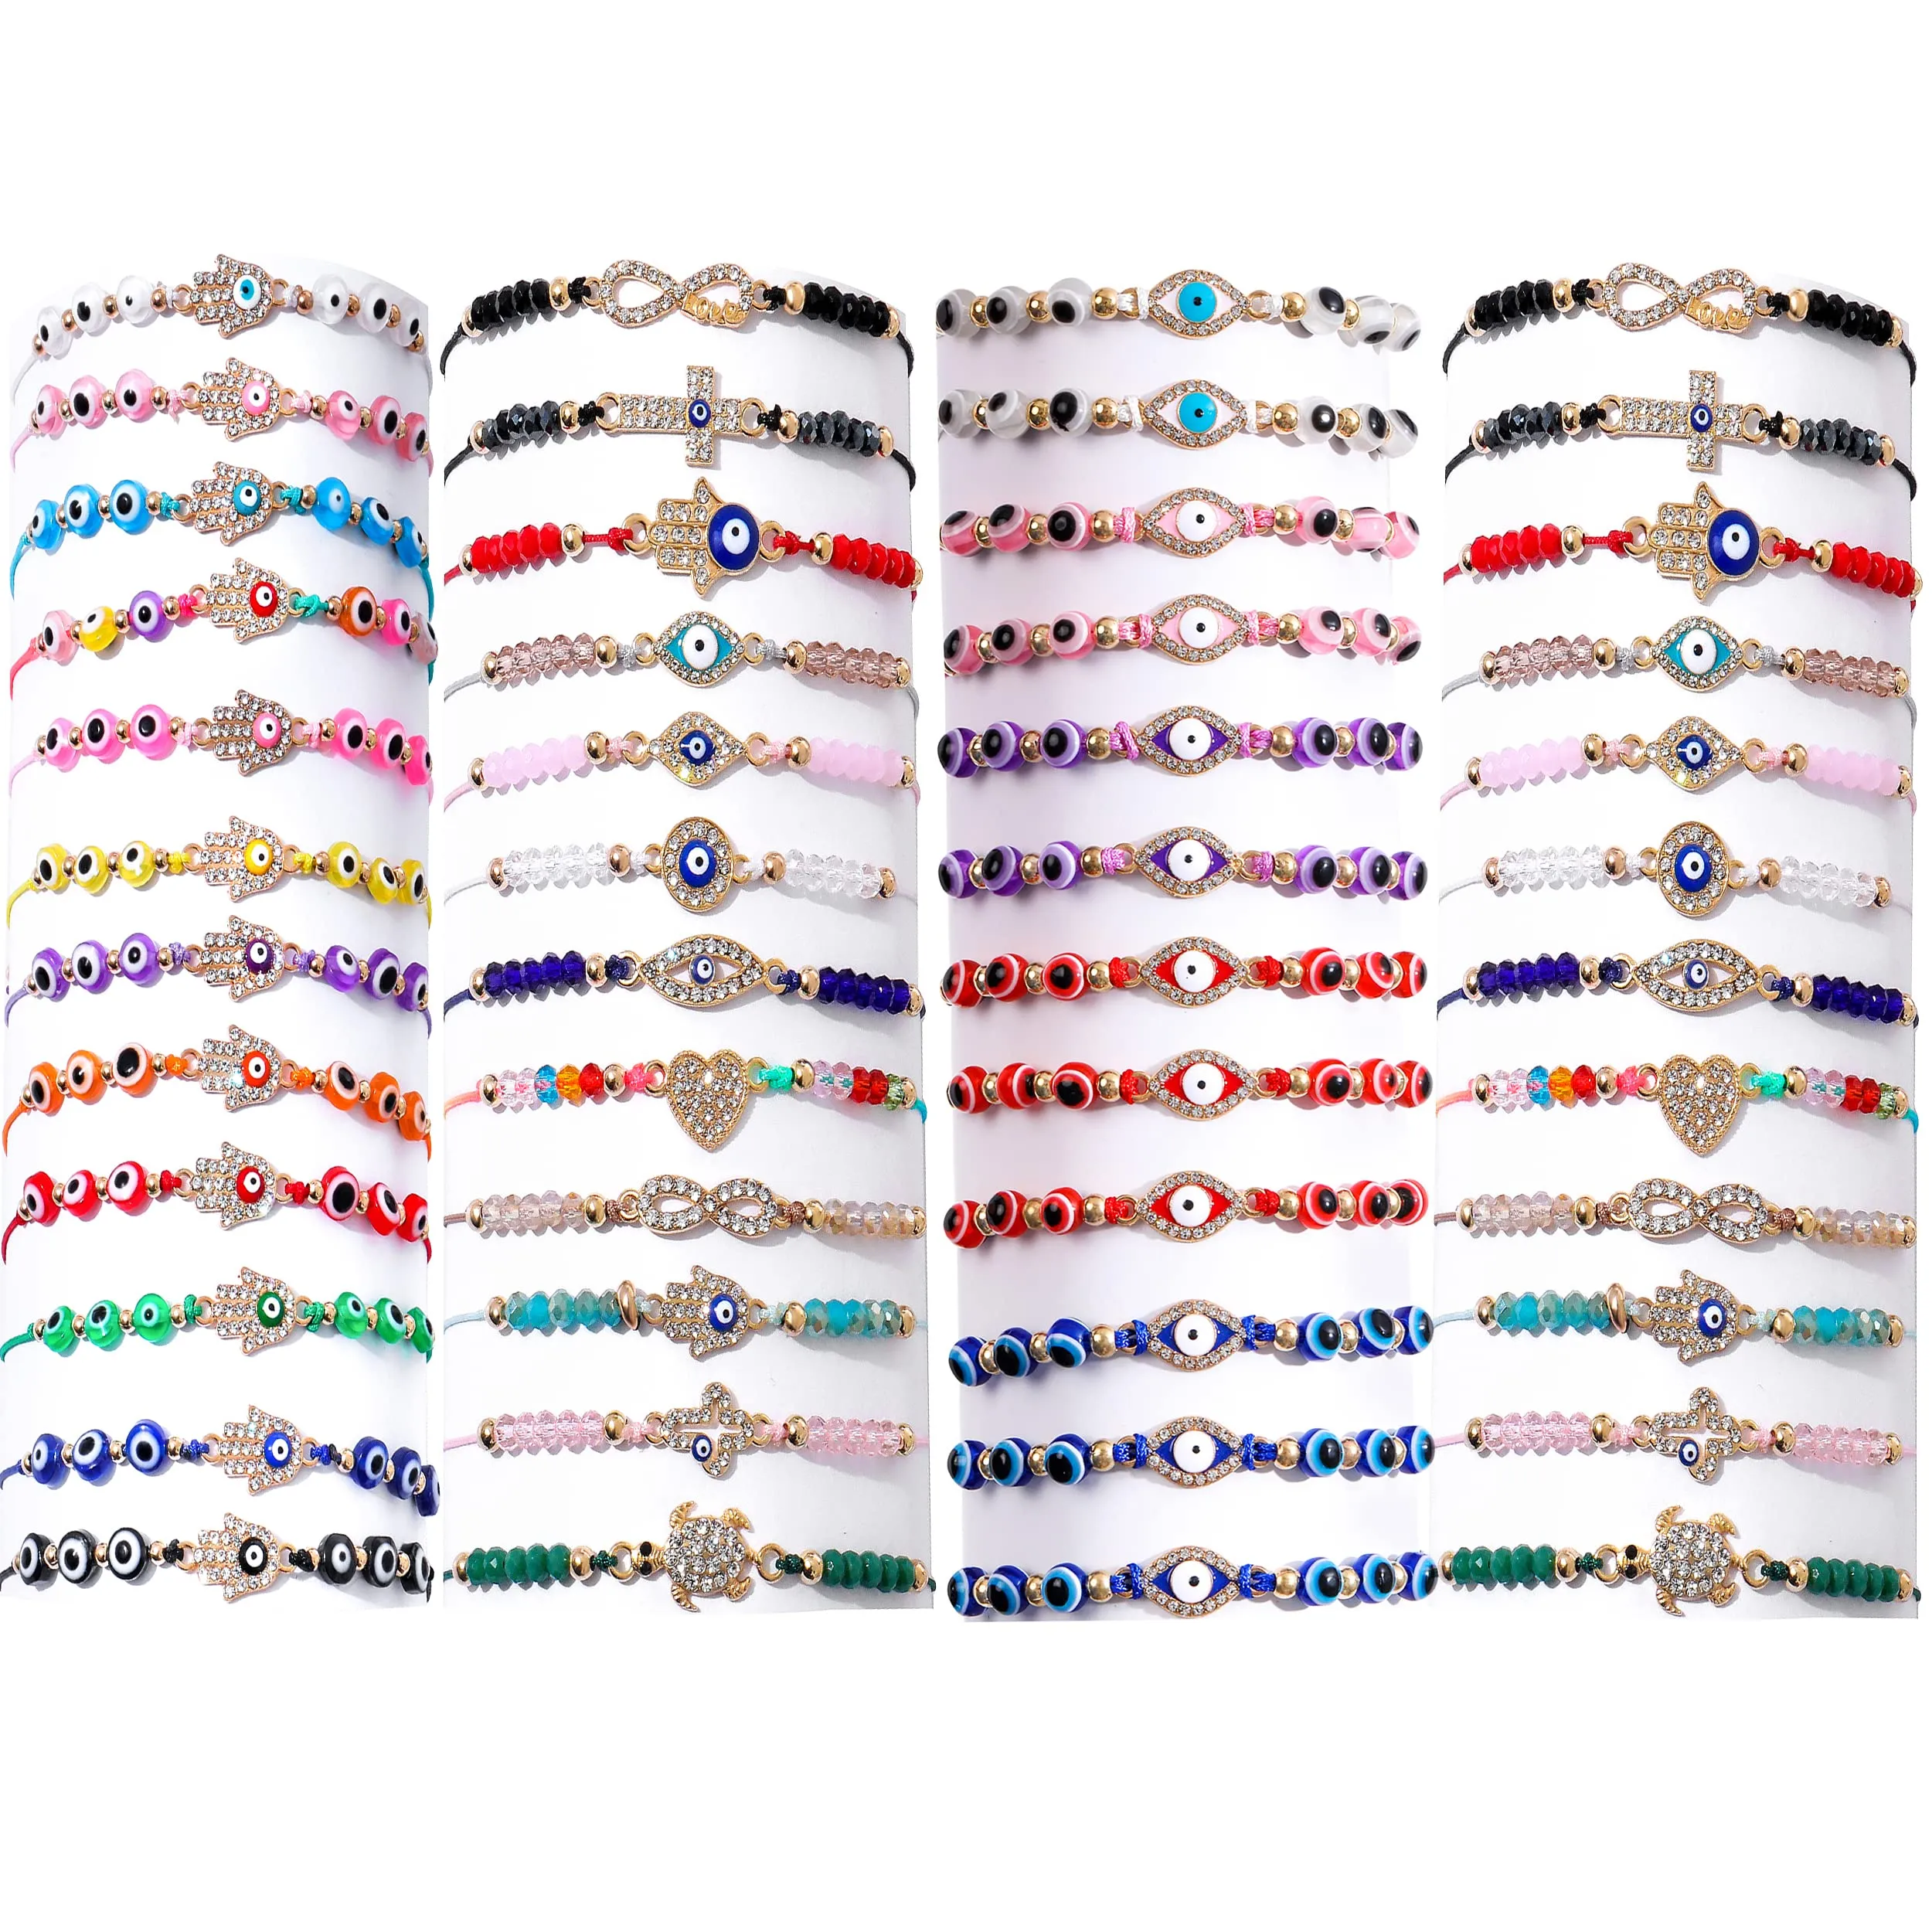 Handmade Mexican Crystal Chain Evil Eye Bracelets Pack For Women, Girls,  And Boys Adjustable With Blue, Red, Or Black String Knot Beads Drop  Delivery Available From Yummy_jewelry, $0.39